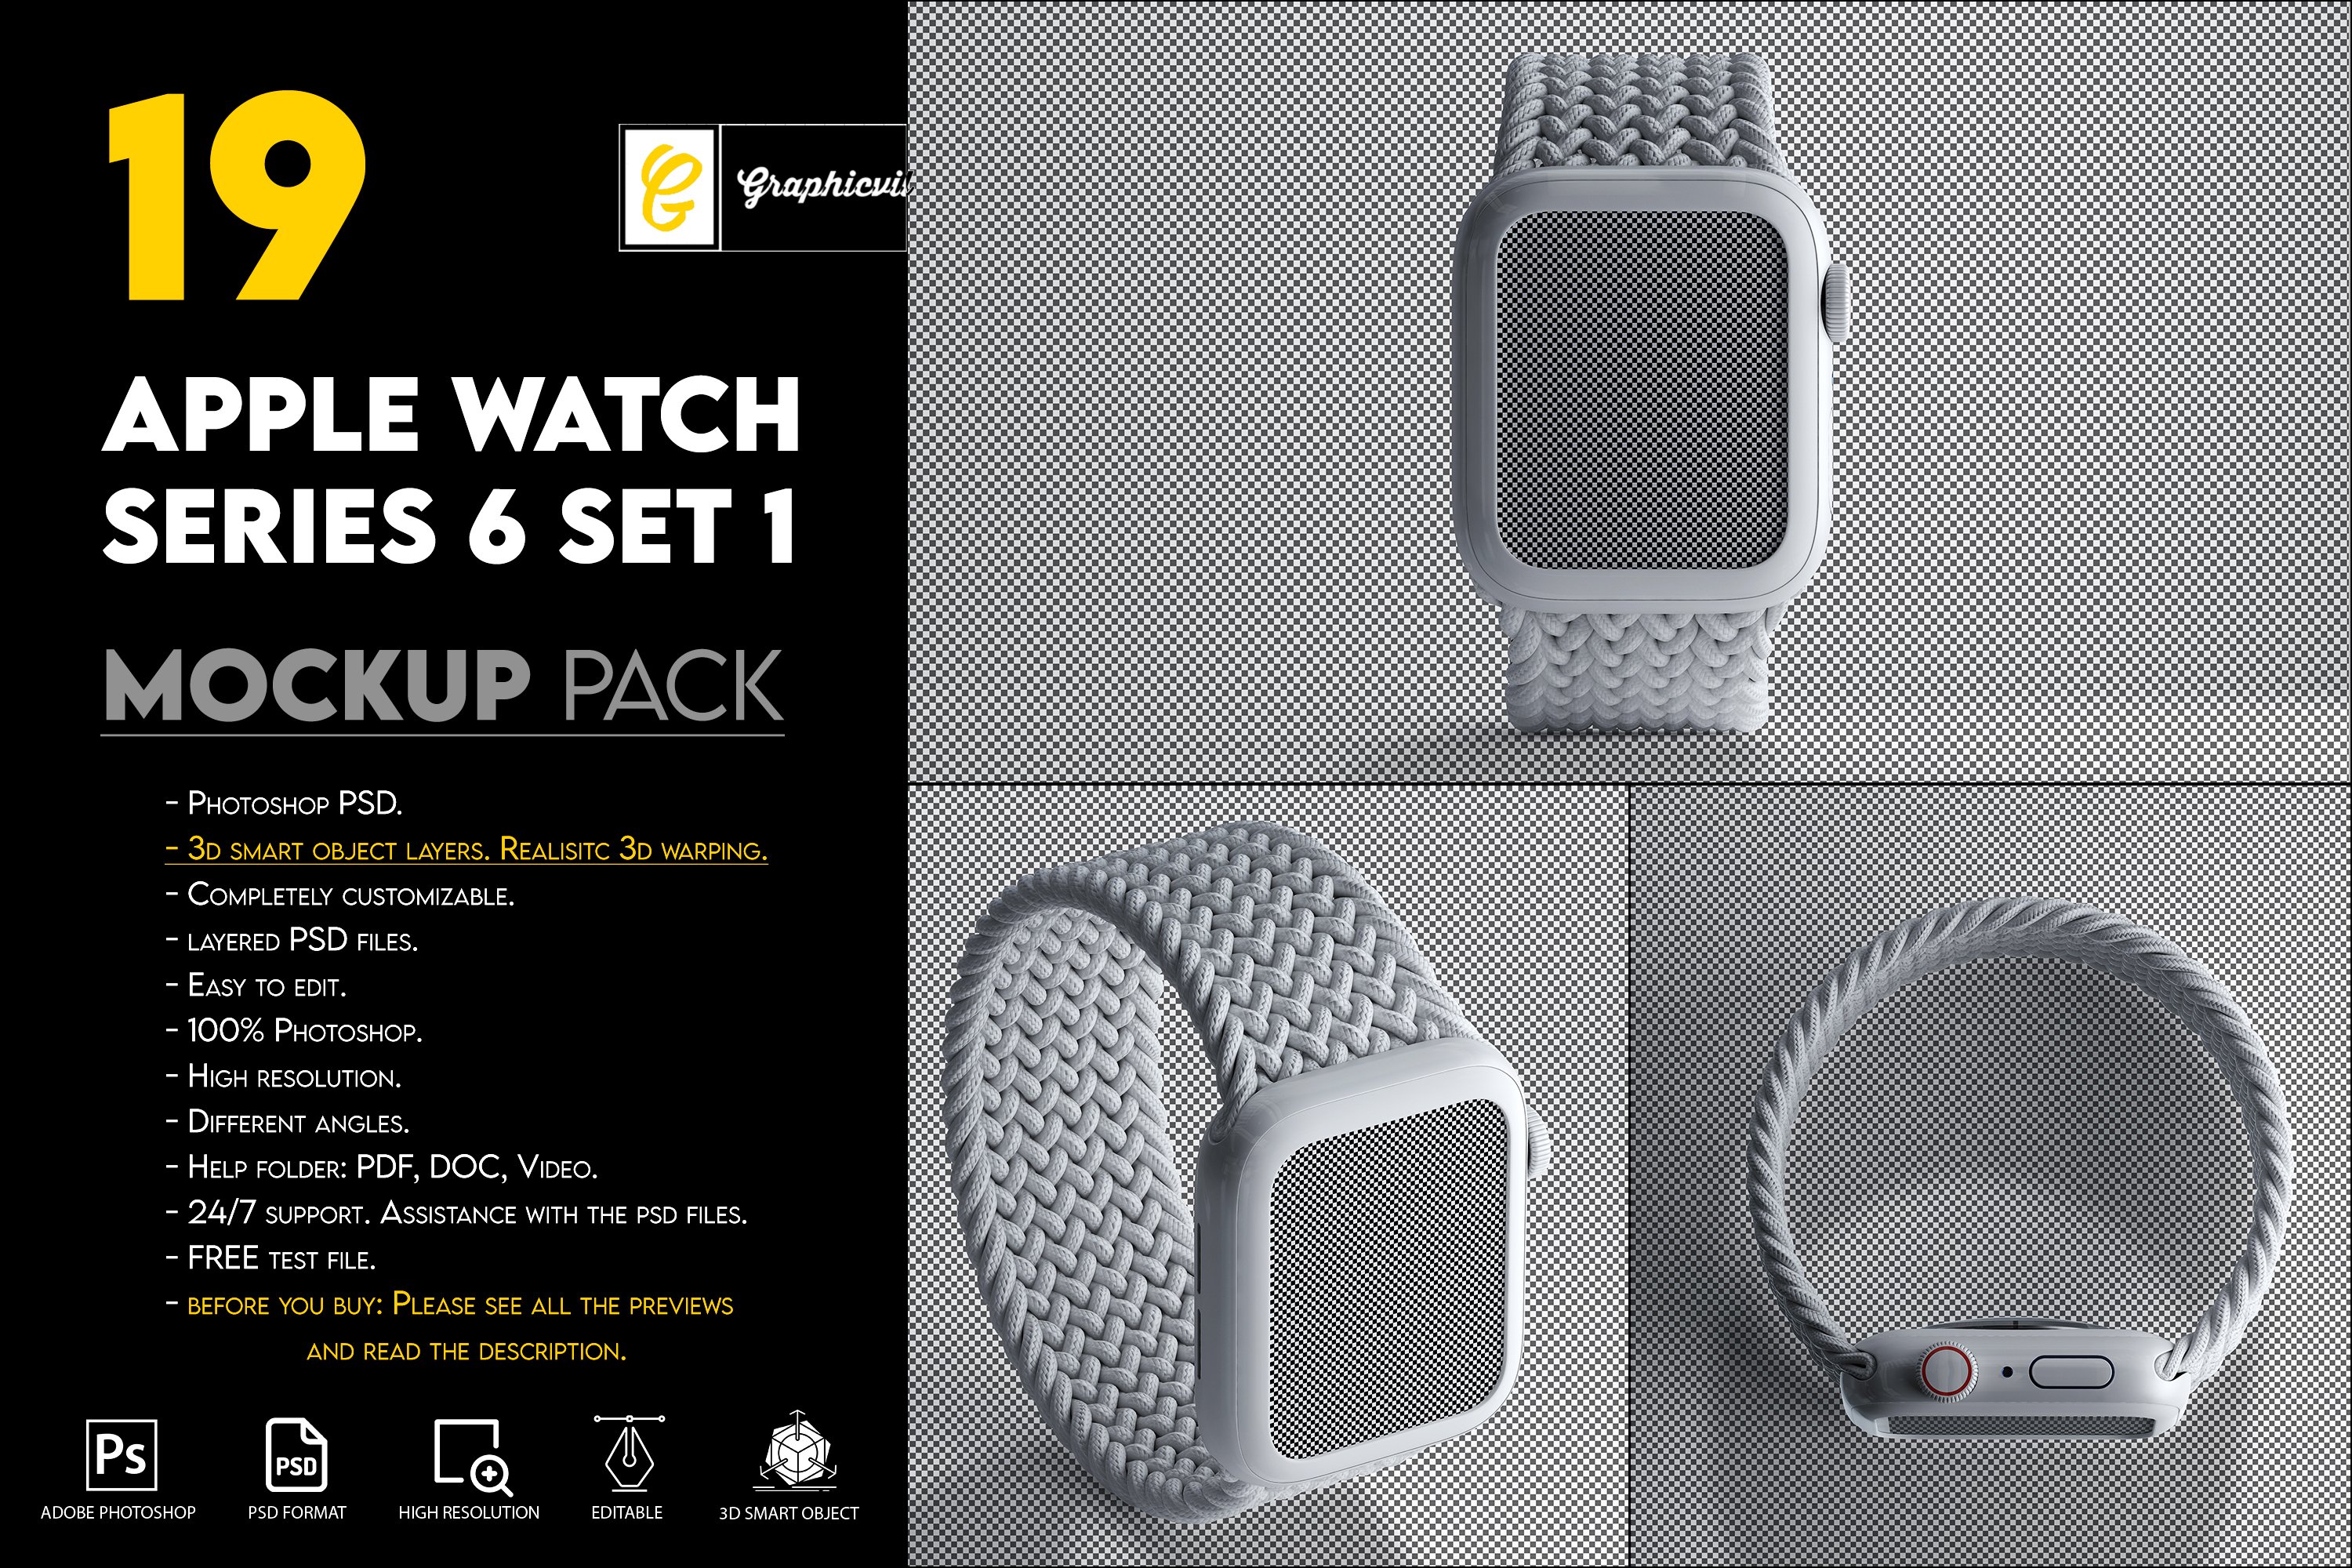 Apple Watch Series 6 mockup set 1 preview image.